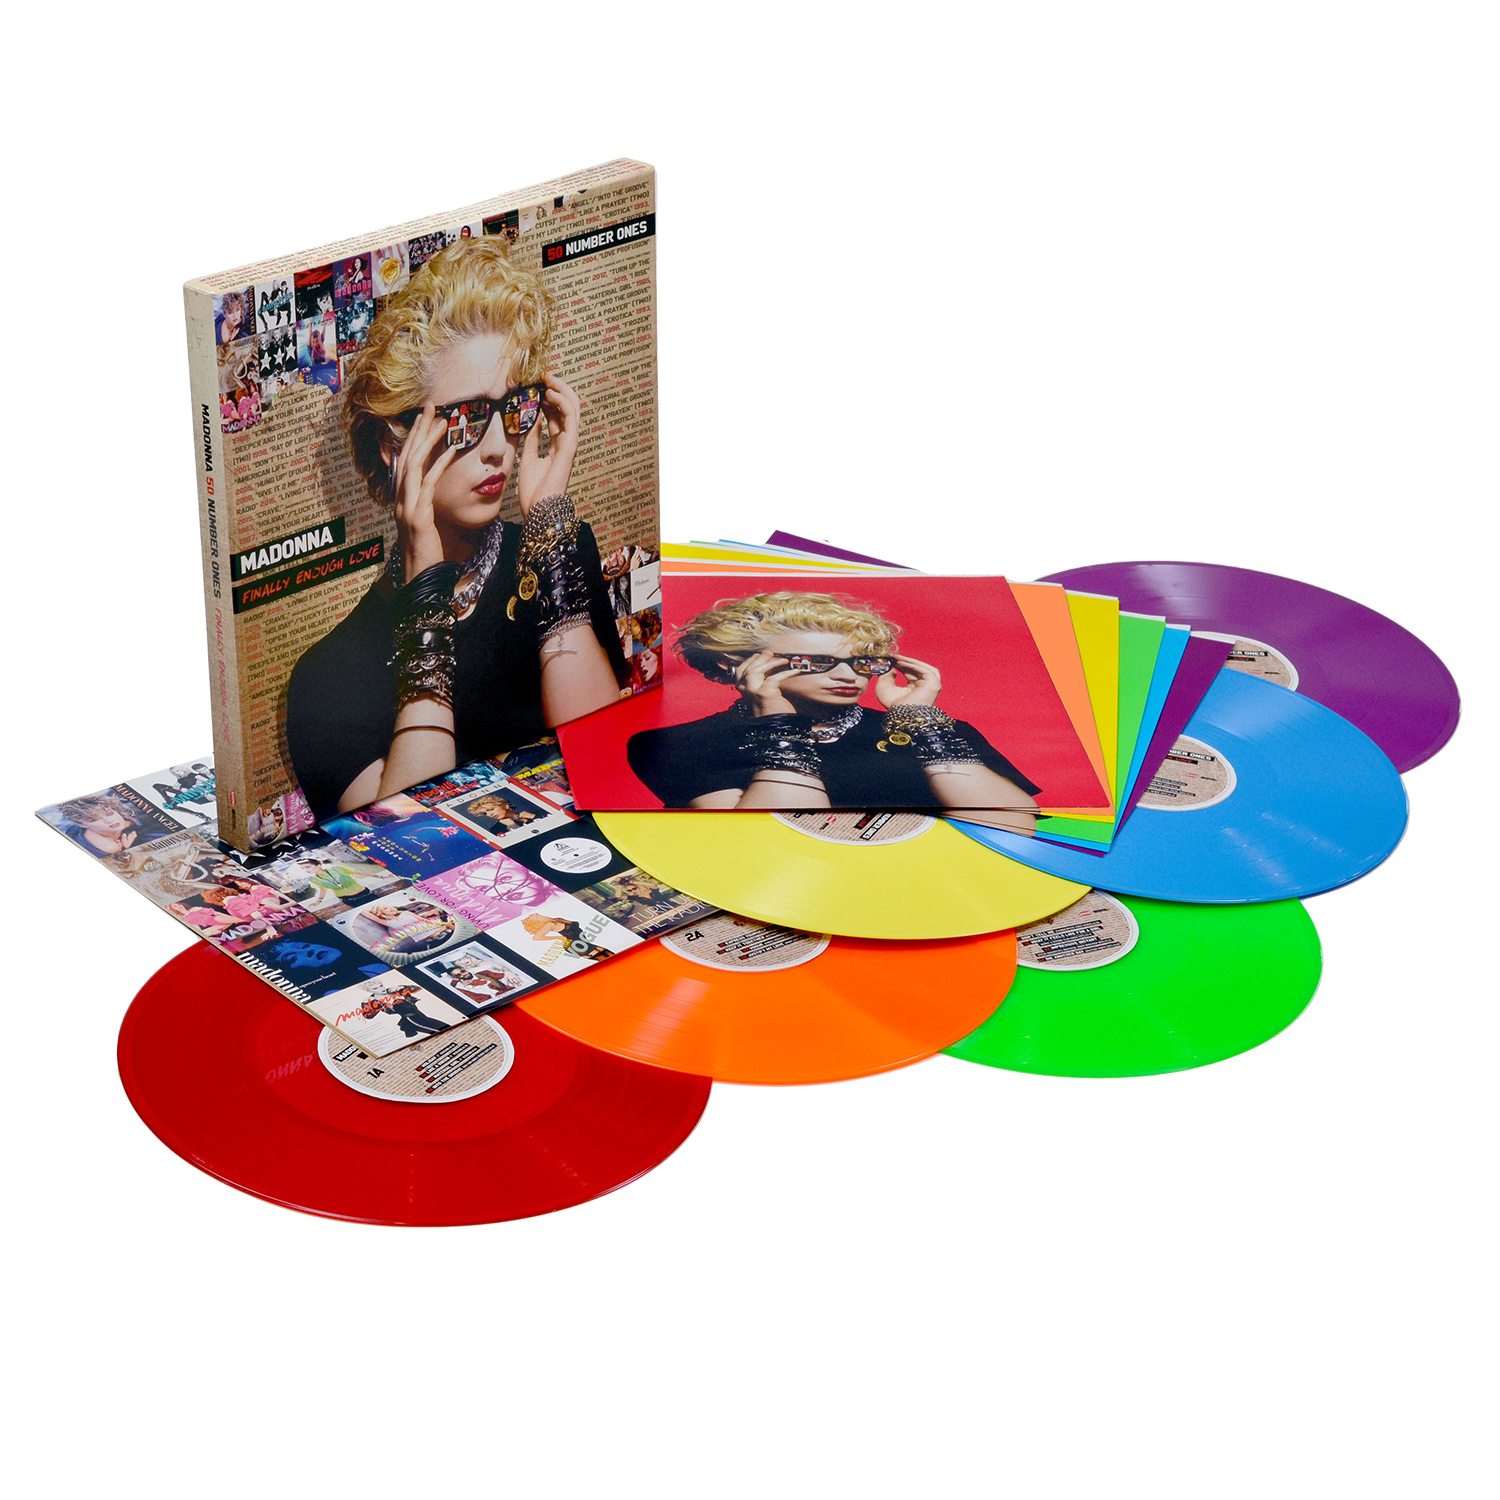 Madonna - Finally Enough Love - Fifty Number Ones: Limited Rainbow Edition 6LP Vinyl Box Set